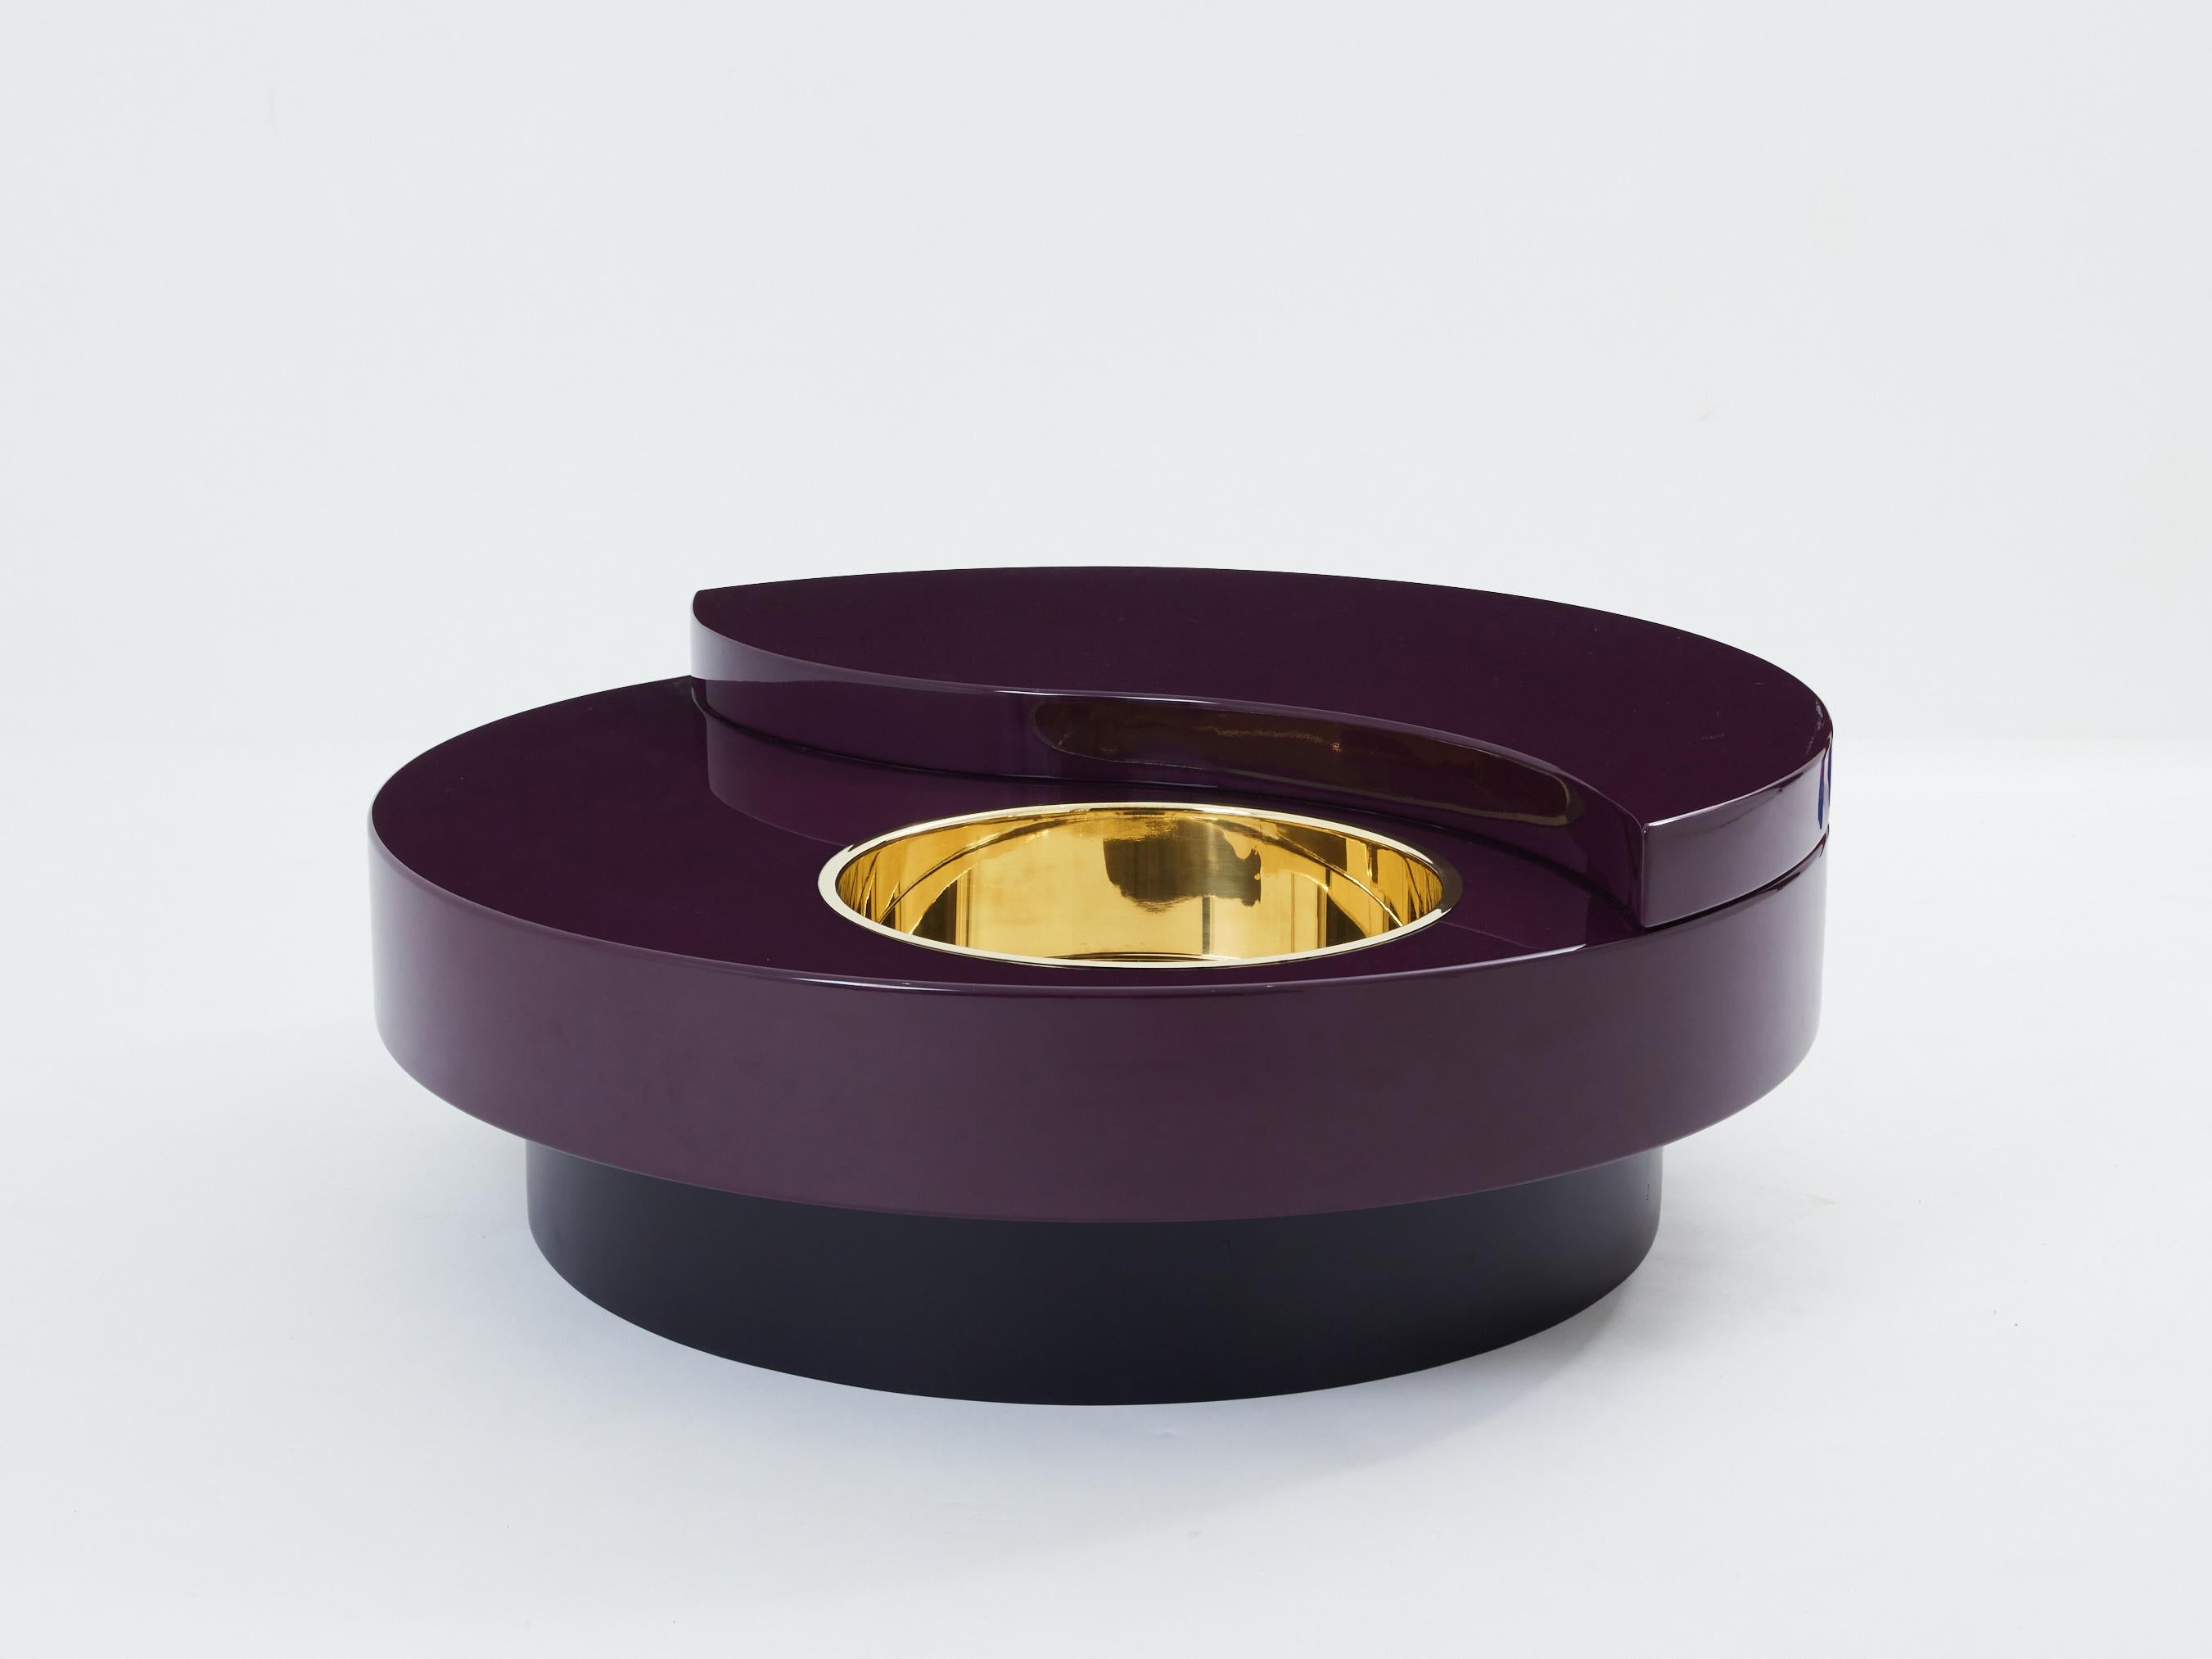 This stunning TRG Yin Yang coffee table is guaranteed to be the focus of attention when you entertain guests in your living room. Following the glamorous mid-century look of other classic Willy Rizzo designs, the crisp eggplant purple lacquered top